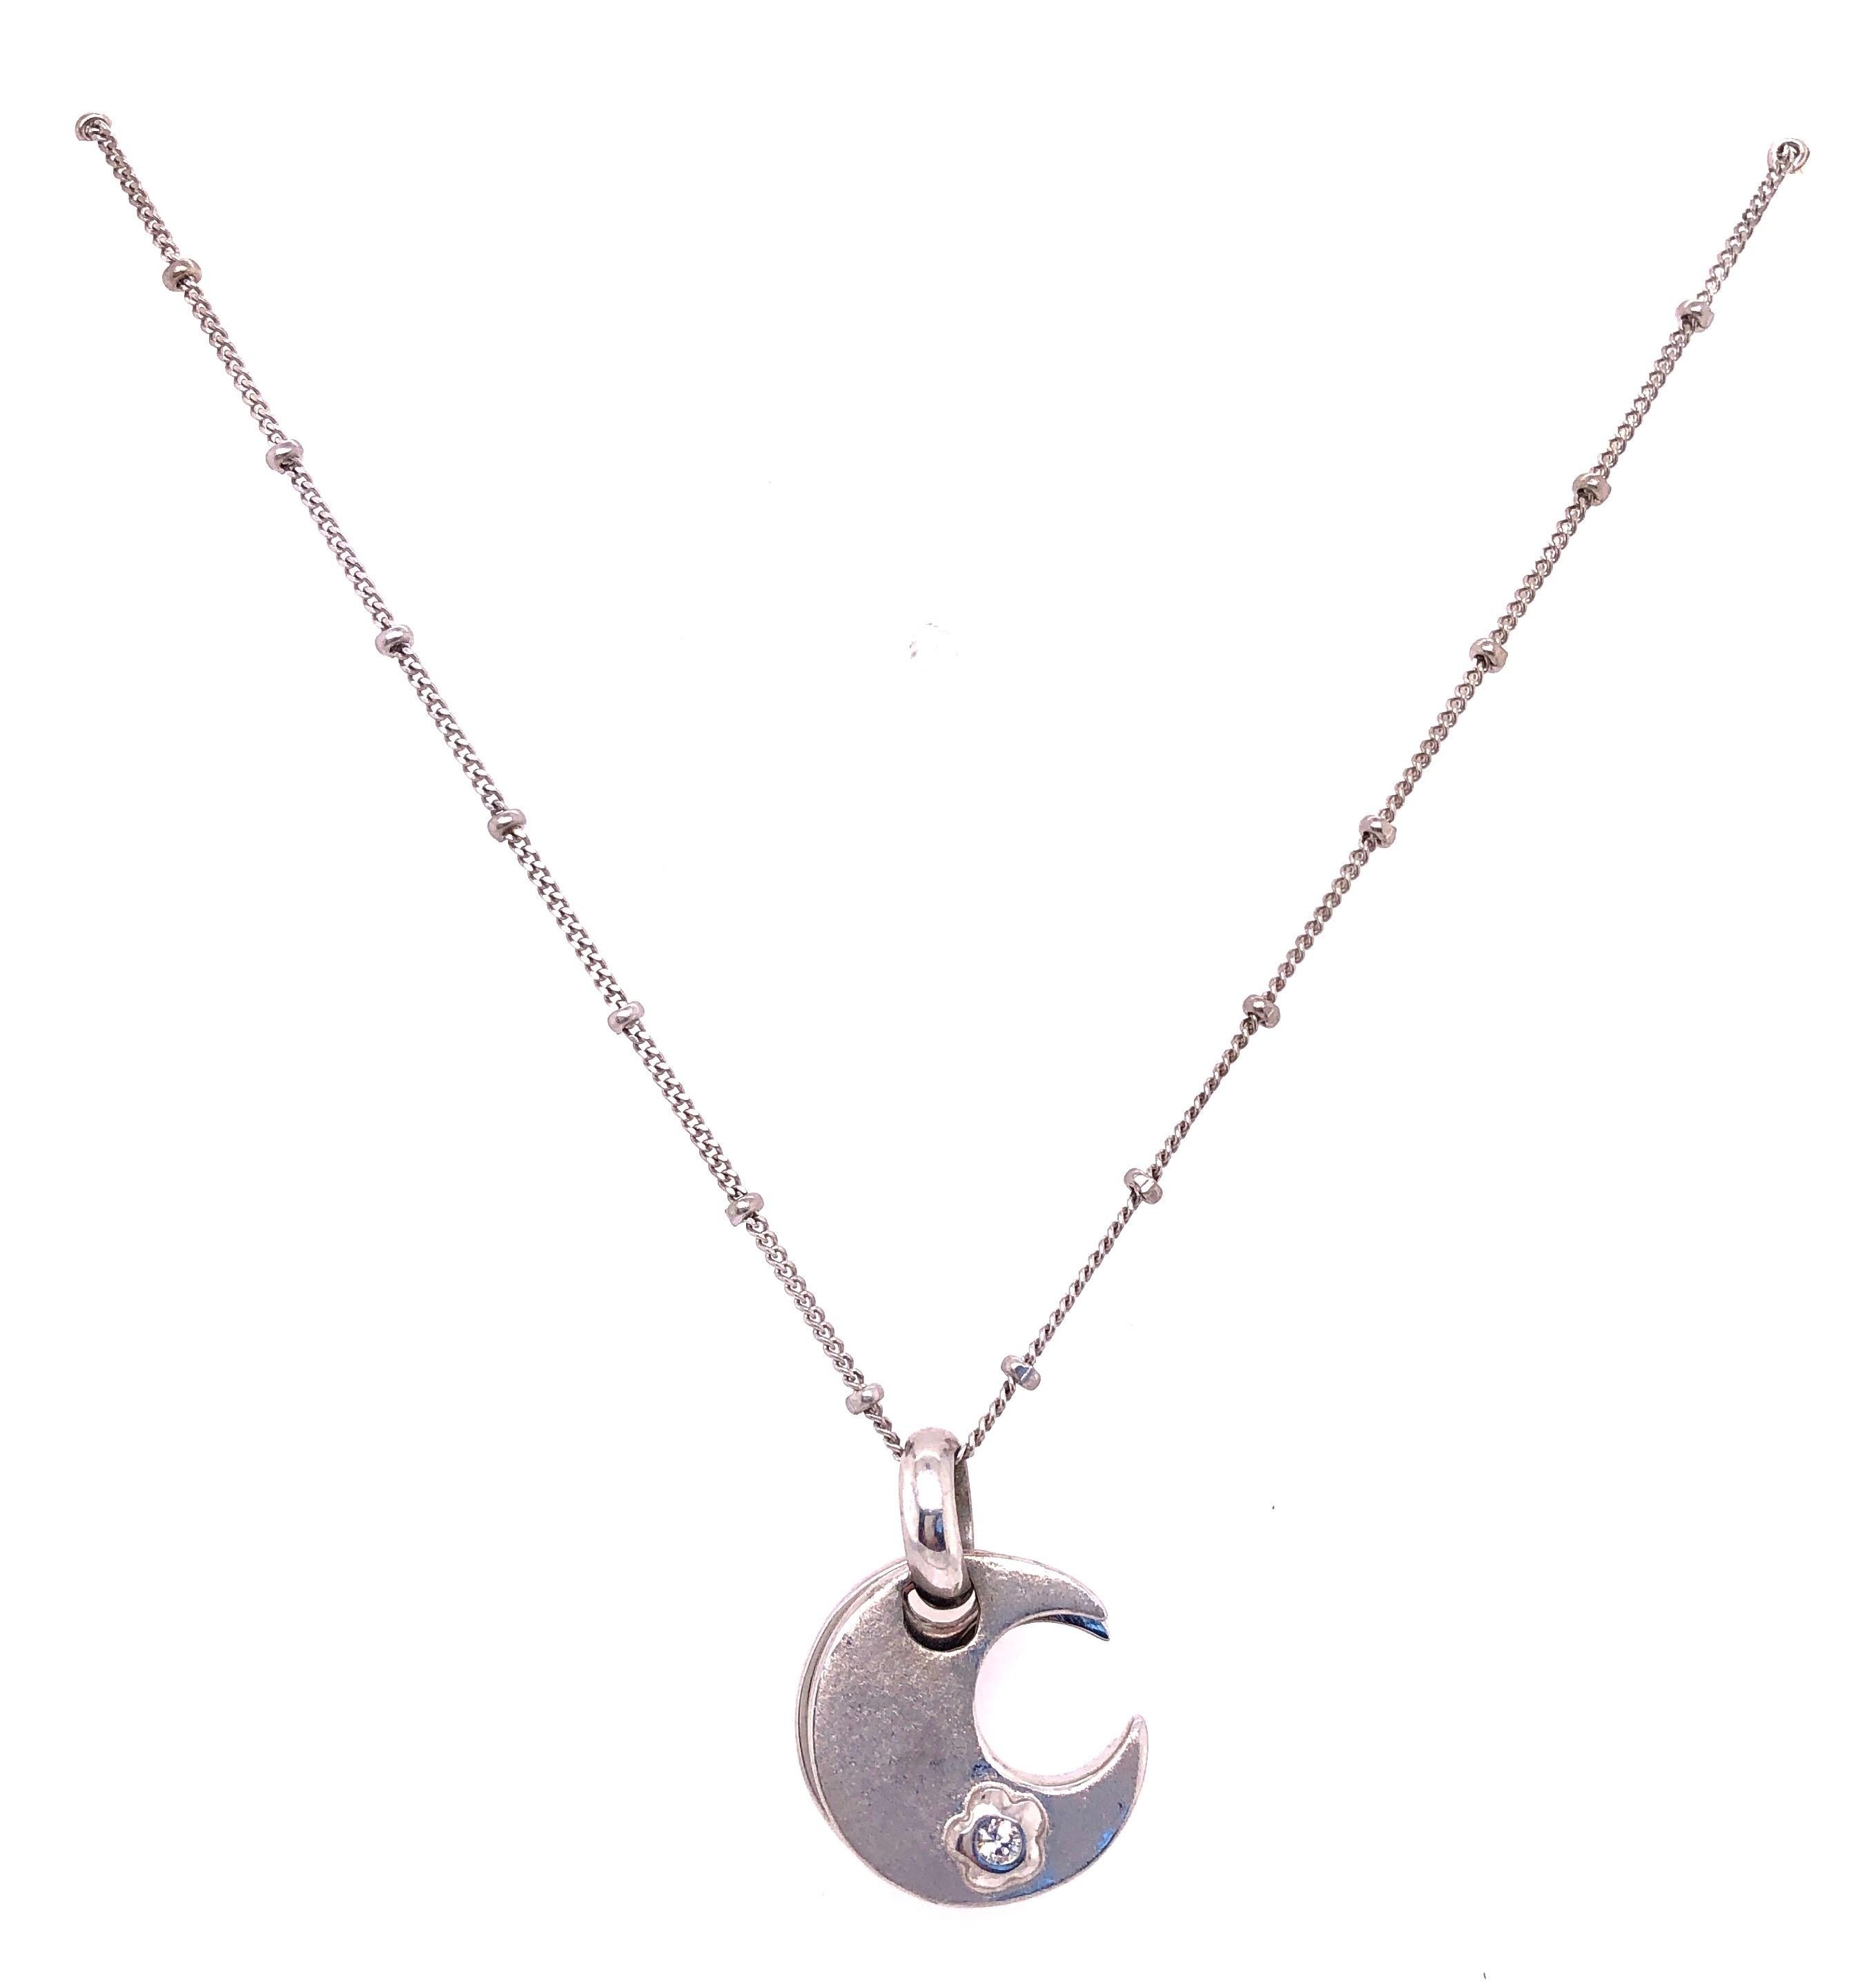 18 Karat White Gold 18 inch Necklace with One 0.10Ct Round Diamond.
8.80 grams total weight.
